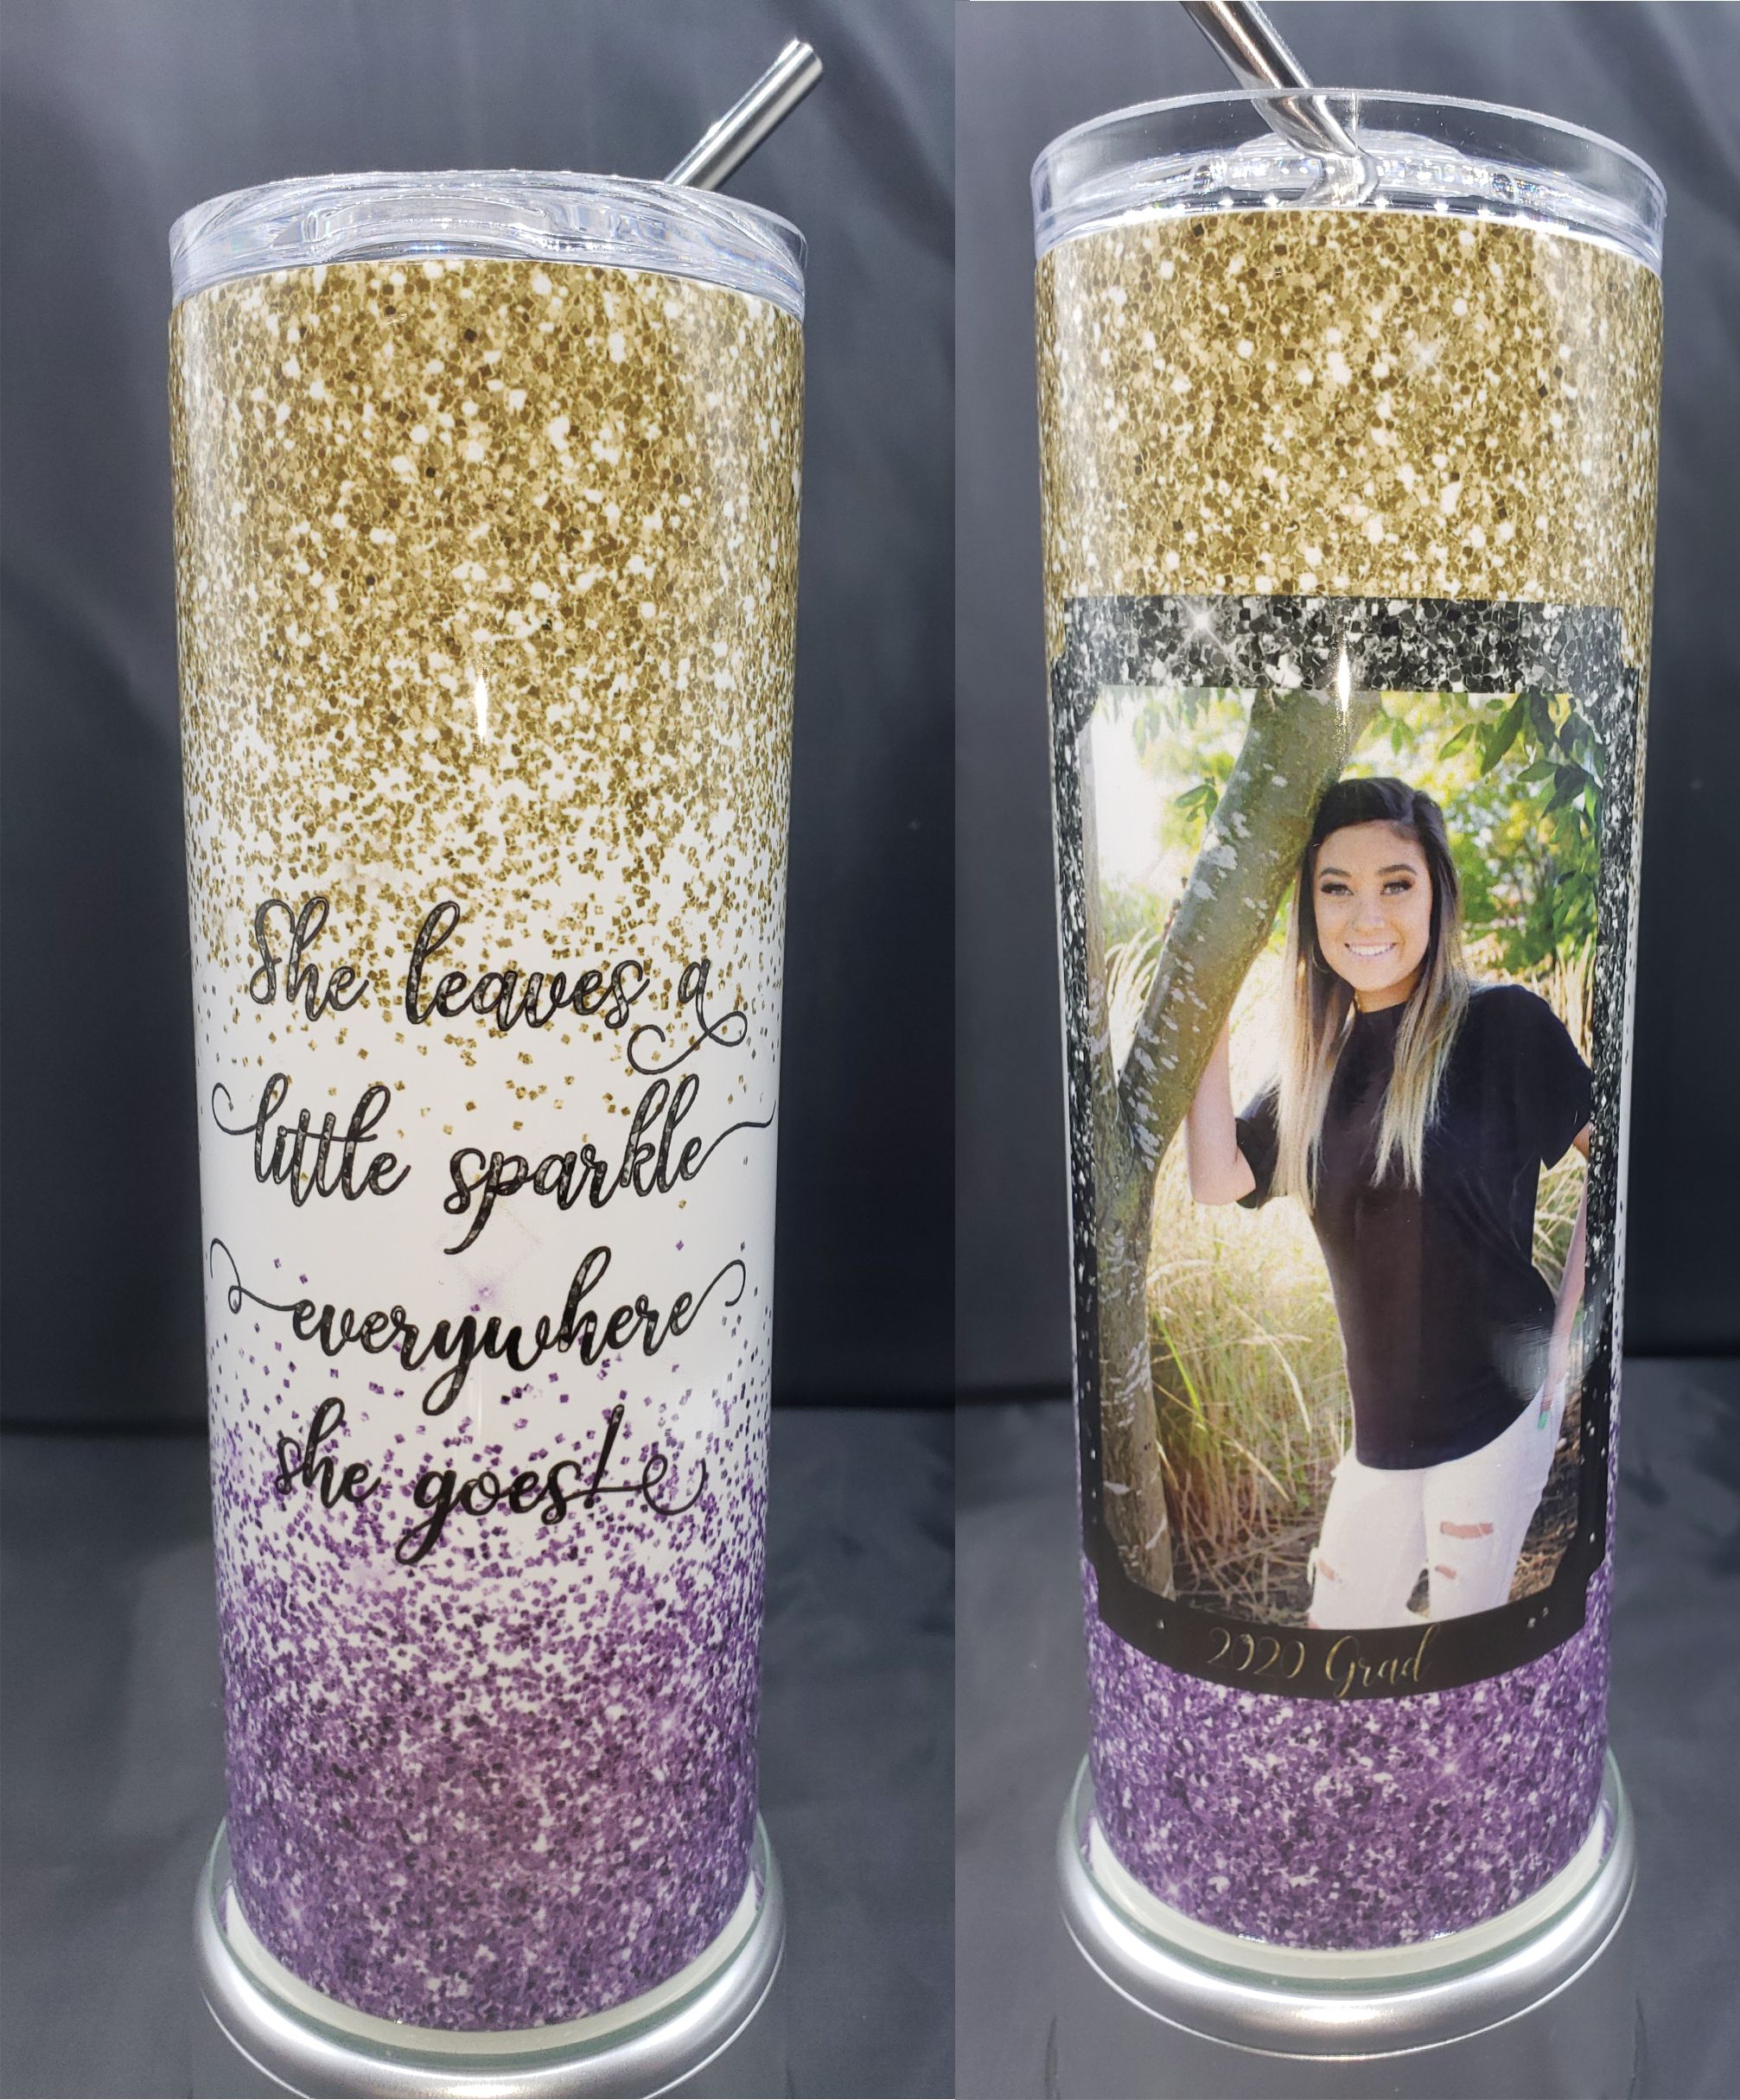 20 oz slim tumbler with graduation photo and saying. The glitter effect really sets it off nice